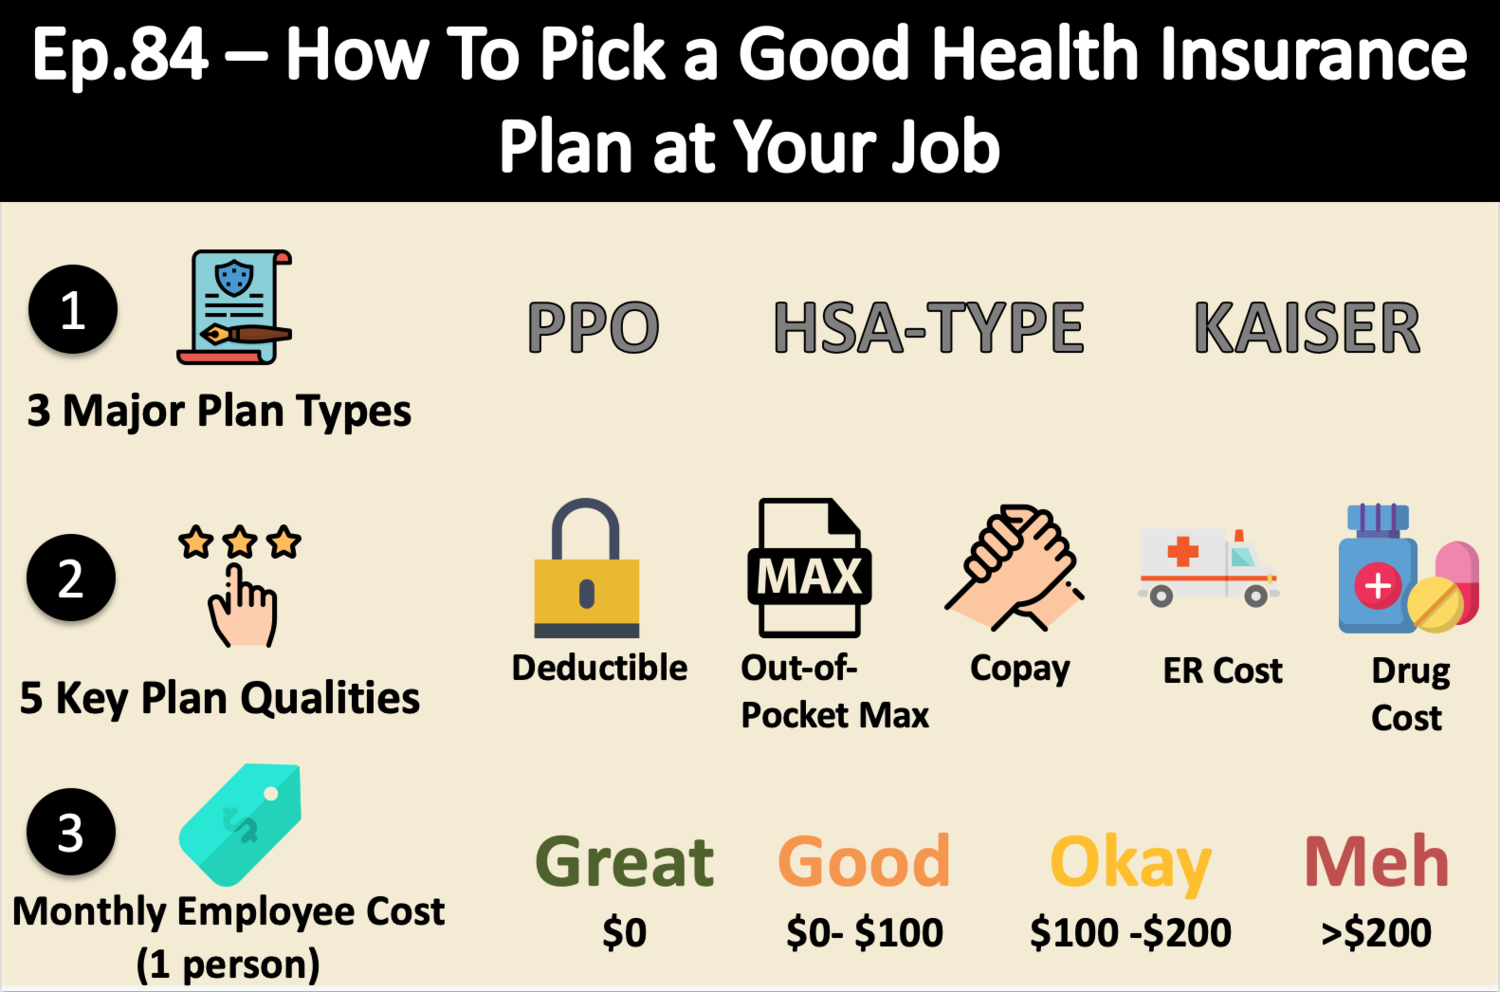 What are the key features of a good health insurance plan?